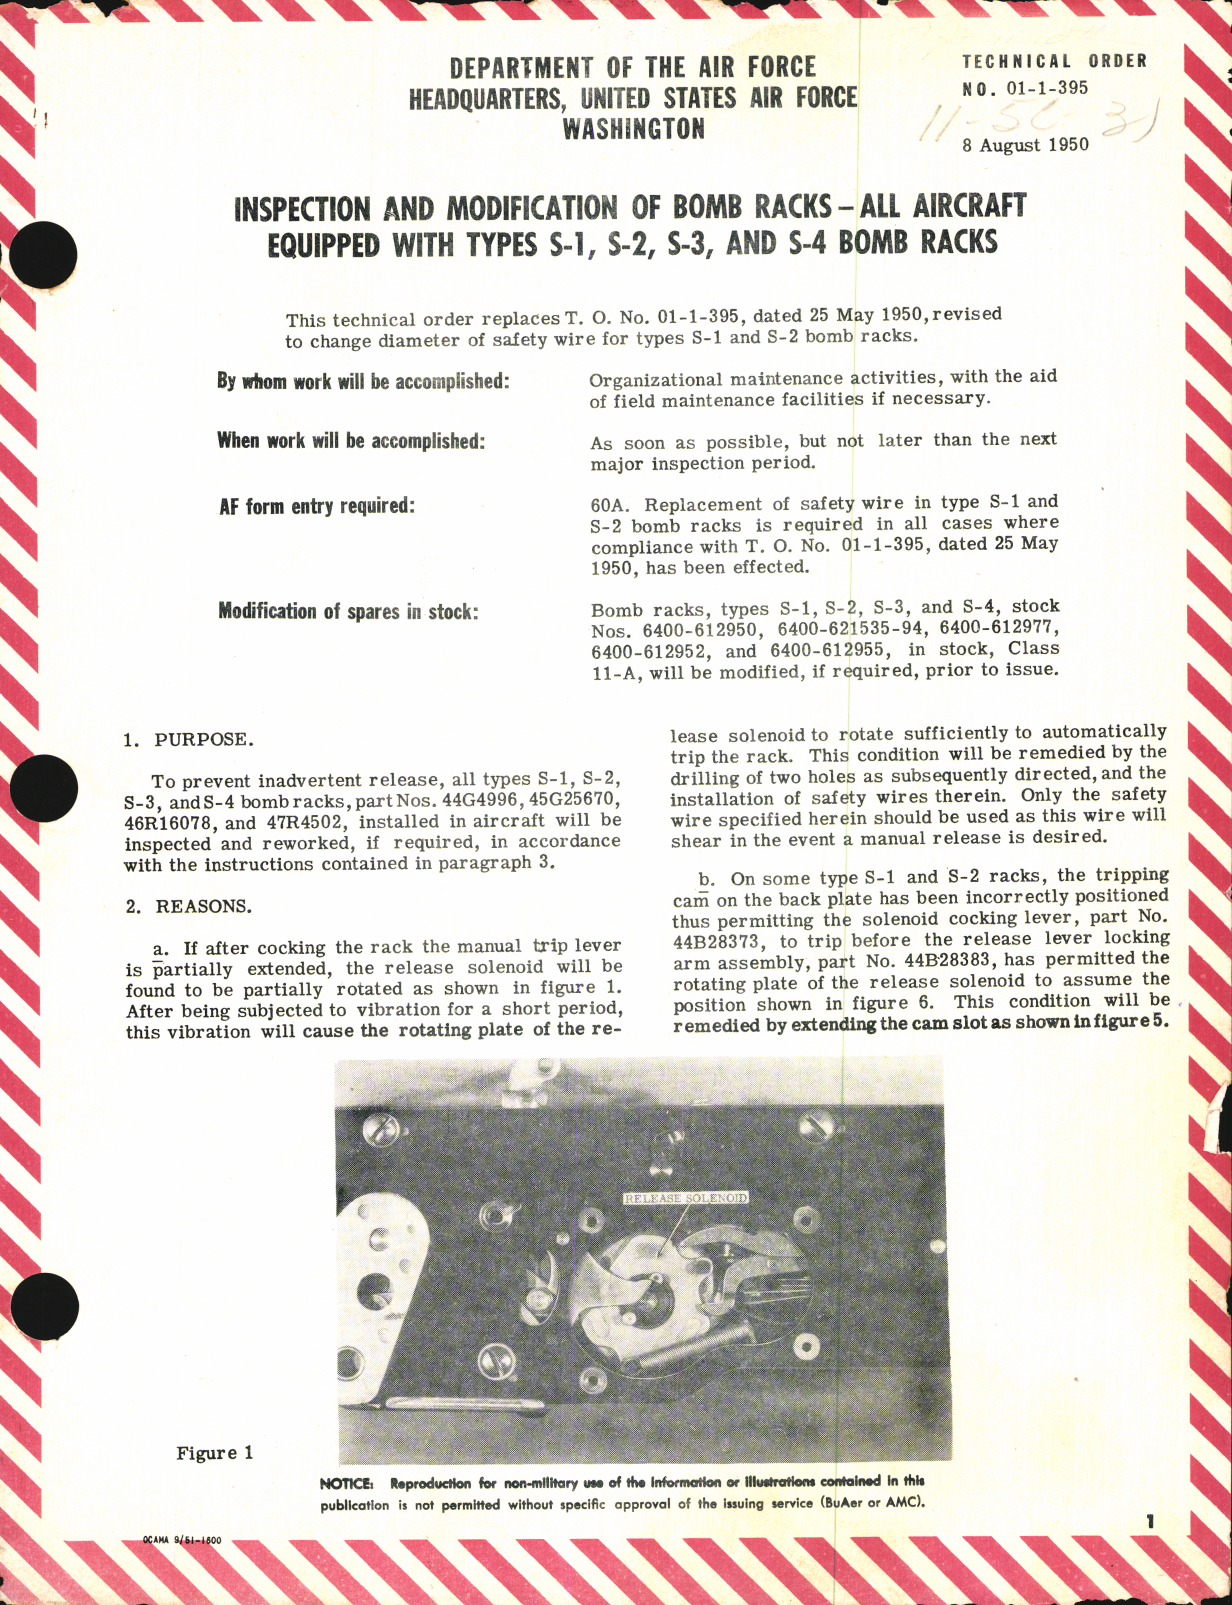 Sample page 1 from AirCorps Library document: Inspection and Modification of Bomb Racks for All Aircraft Equipped with Types S-1, S-2, S-3, & S-4 Bomb Racks